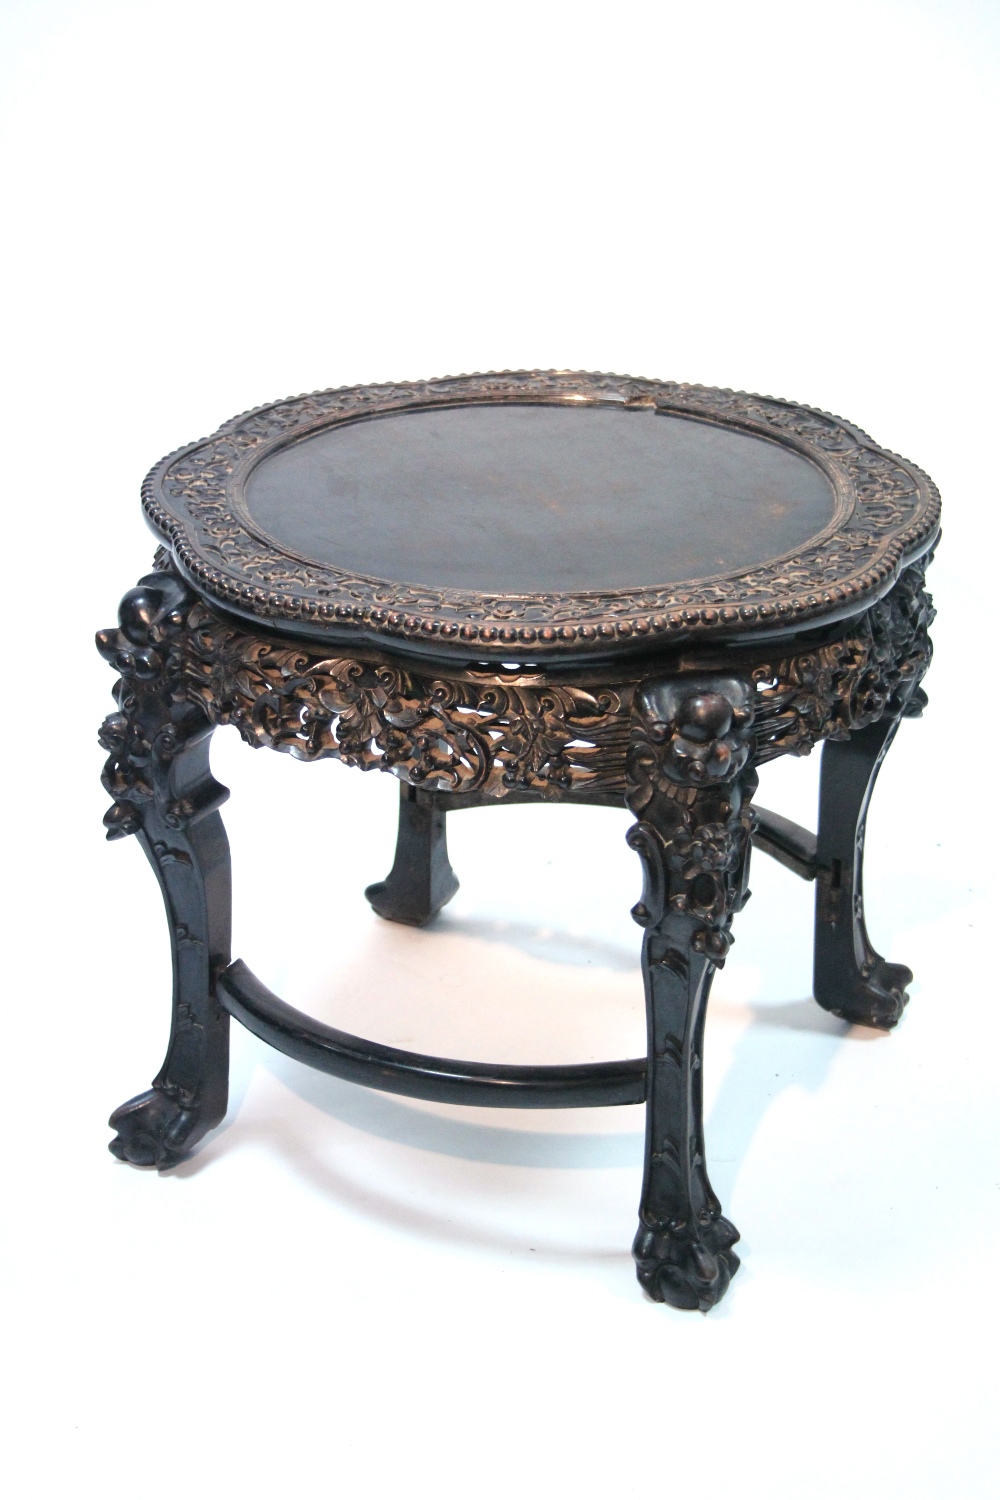 A late 19th century Chinese hardwood circular occasional table with lobed border & all-over carved